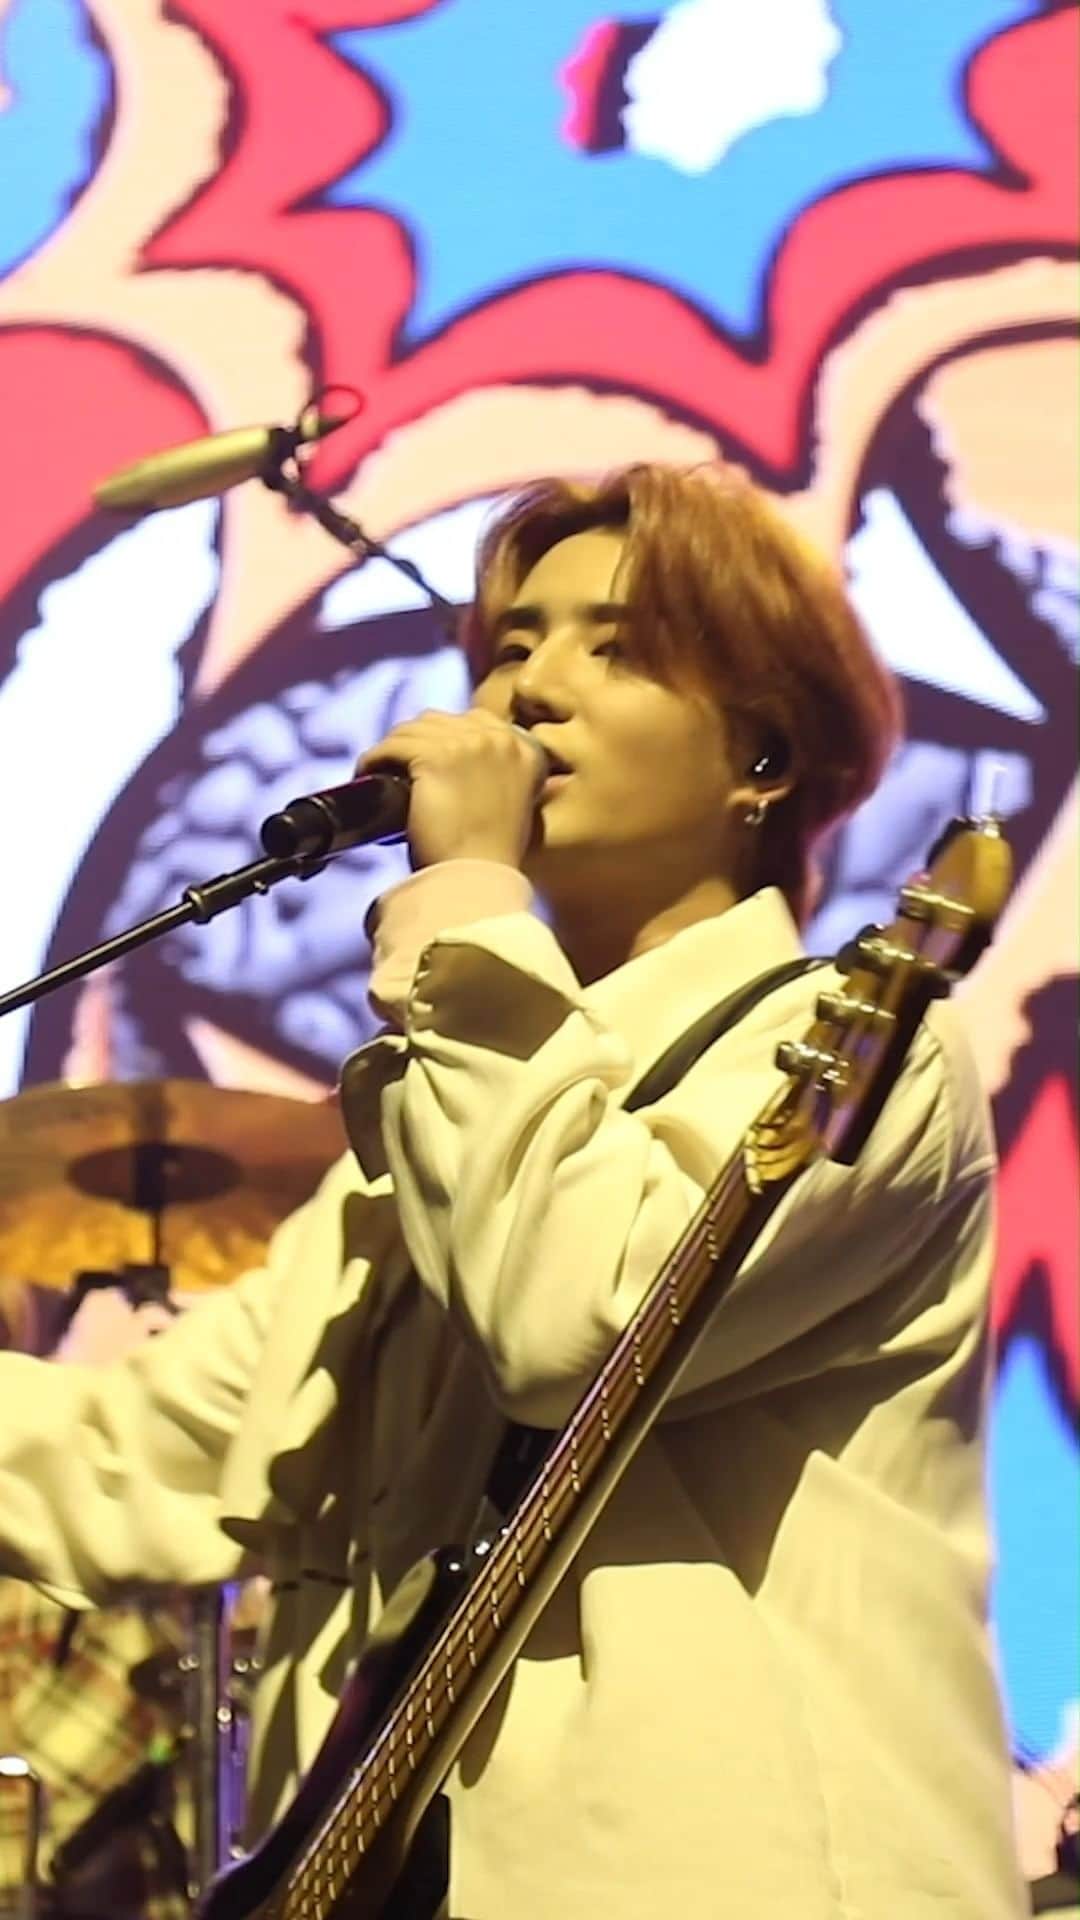 DAY6のインスタグラム：「[LIVE CAM] Young K - 완전 멋지잖아 (Rap Part) @ 2019 2ND WORLD TOUR 'GRAVITY'  #DAY6 #데이식스 #YoungK #완전_멋지잖아  @from_youngk」